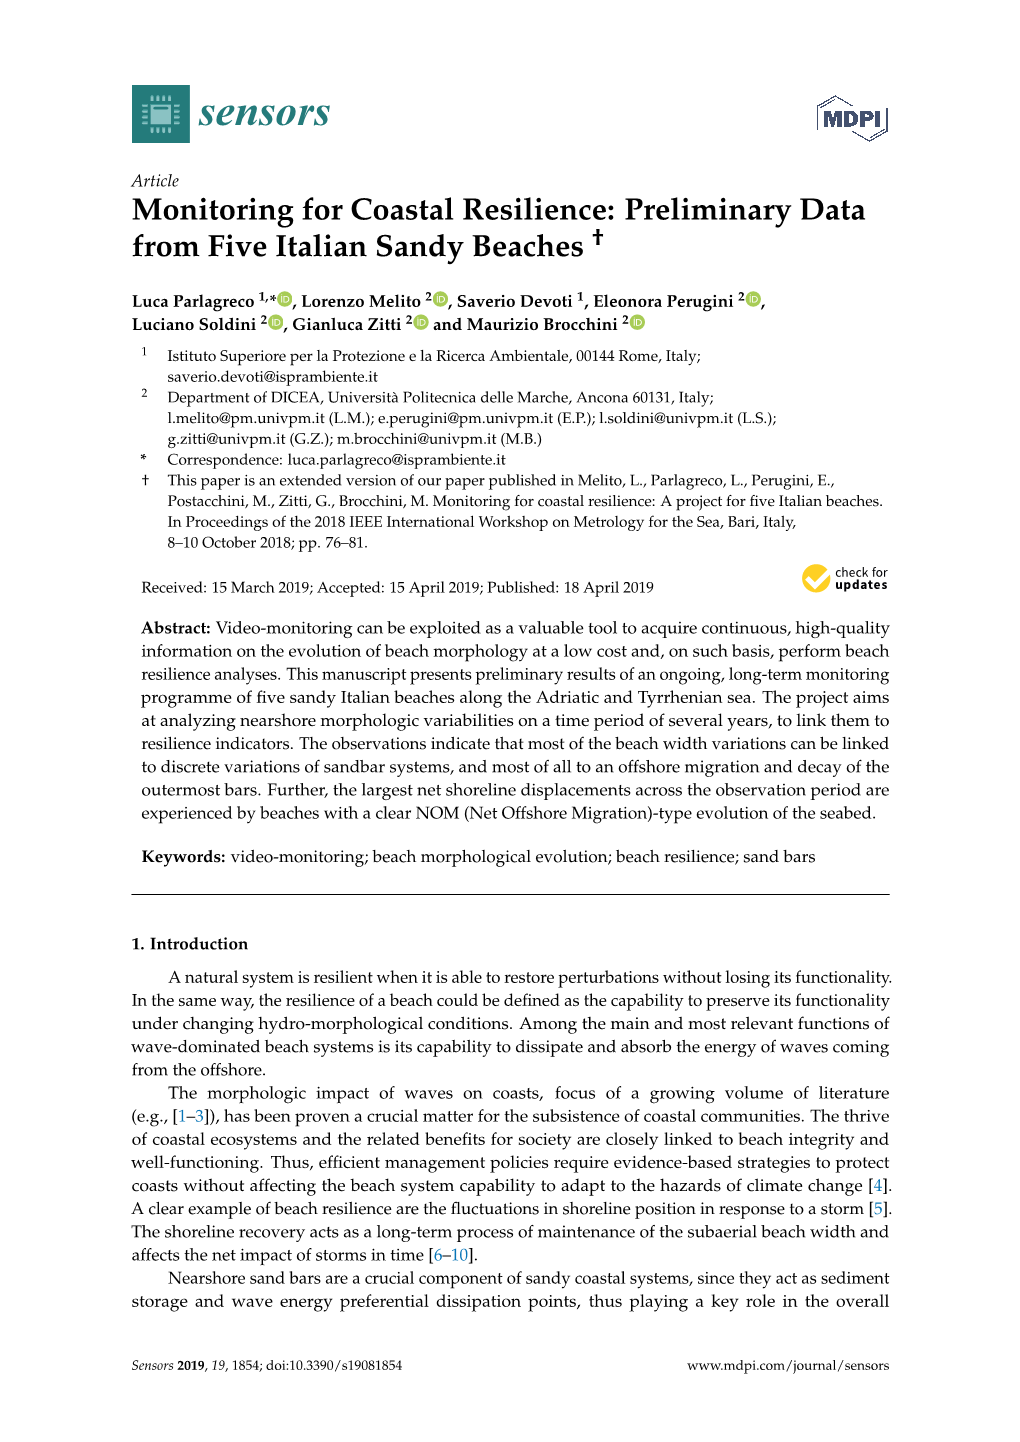 Monitoring for Coastal Resilience: Preliminary Data from Five Italian Sandy Beaches †